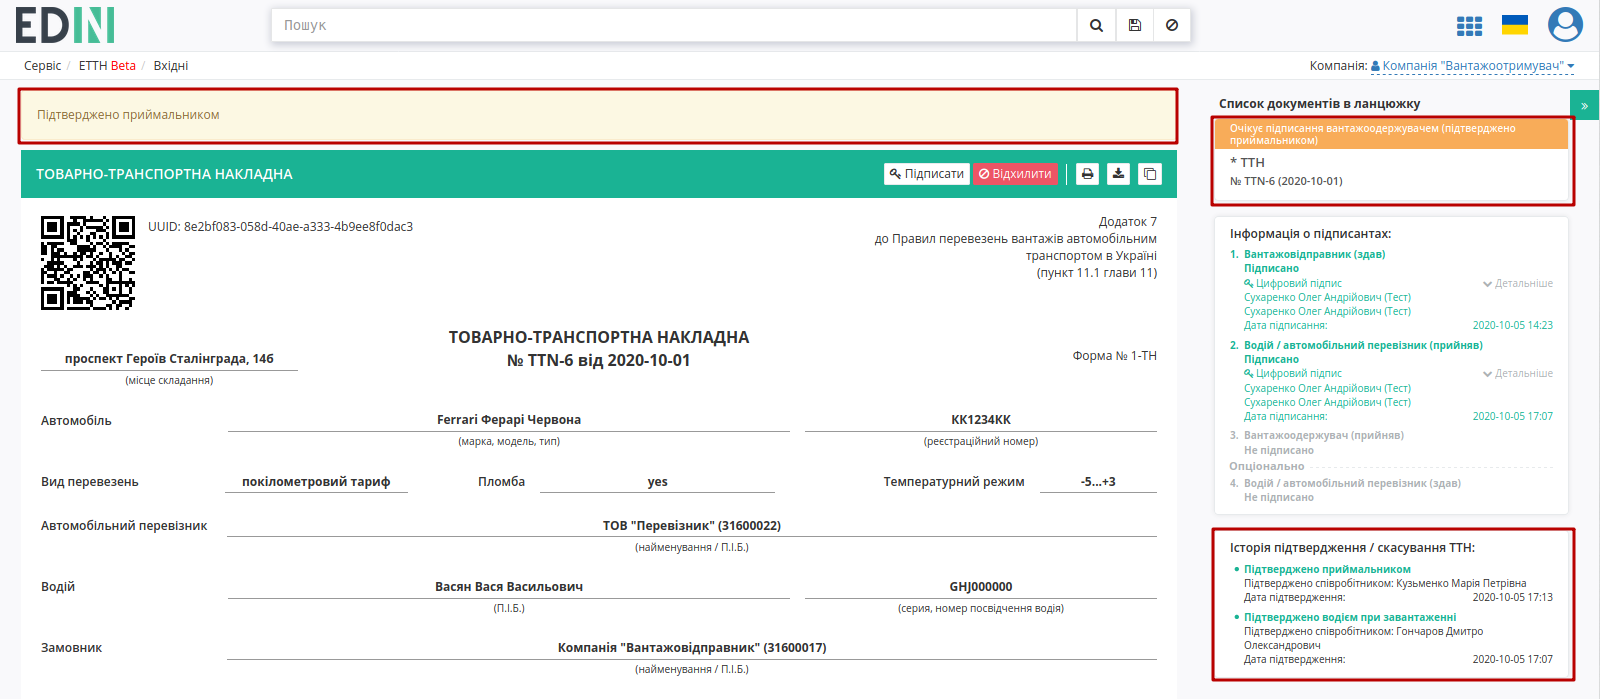 ../_images/Signing_rejection_ETTN_consignee_18.png